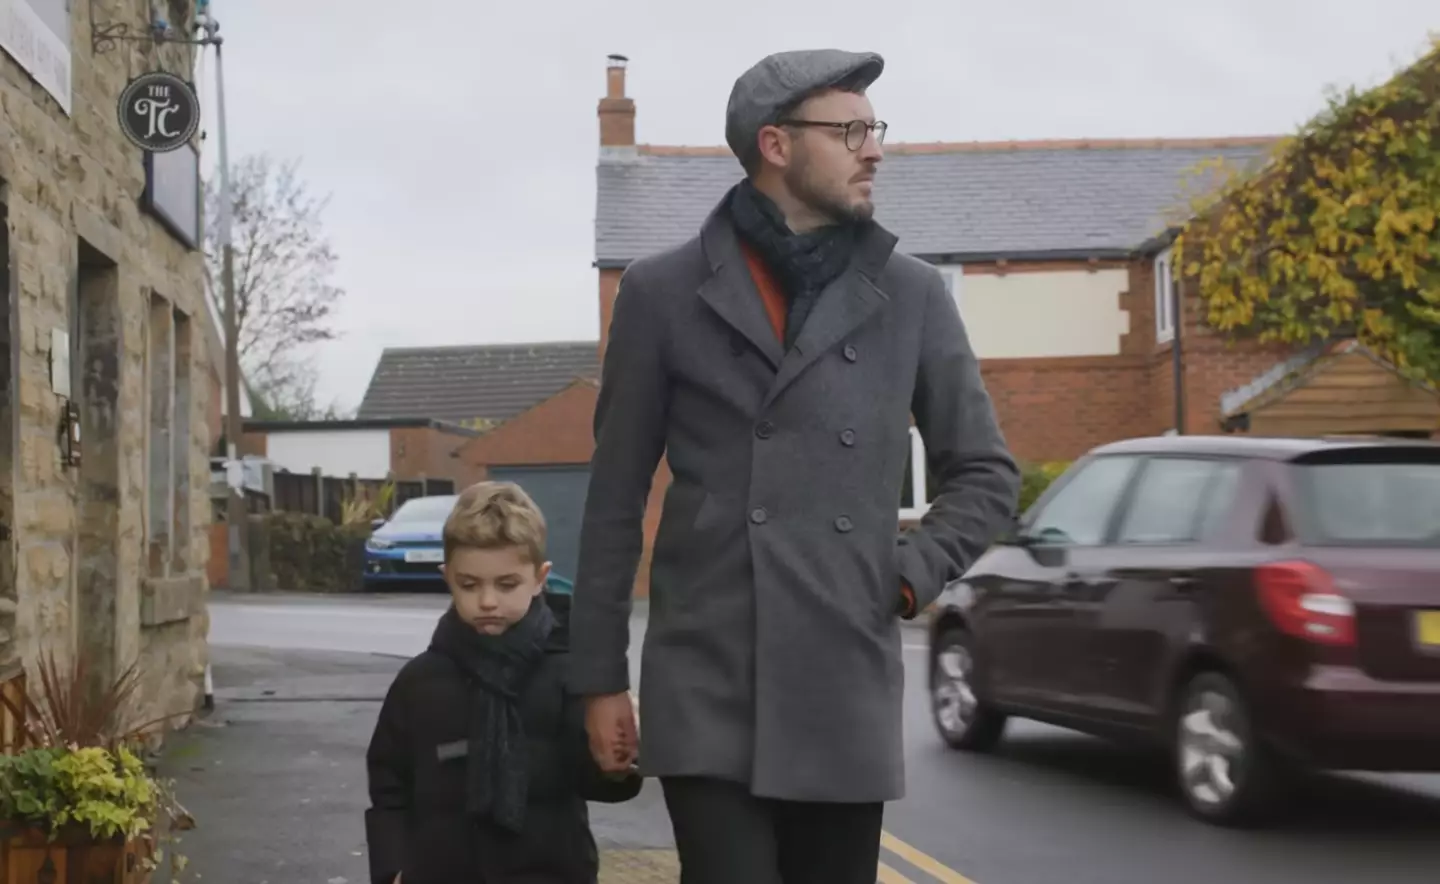 The advert tells the story of a dad and his son.